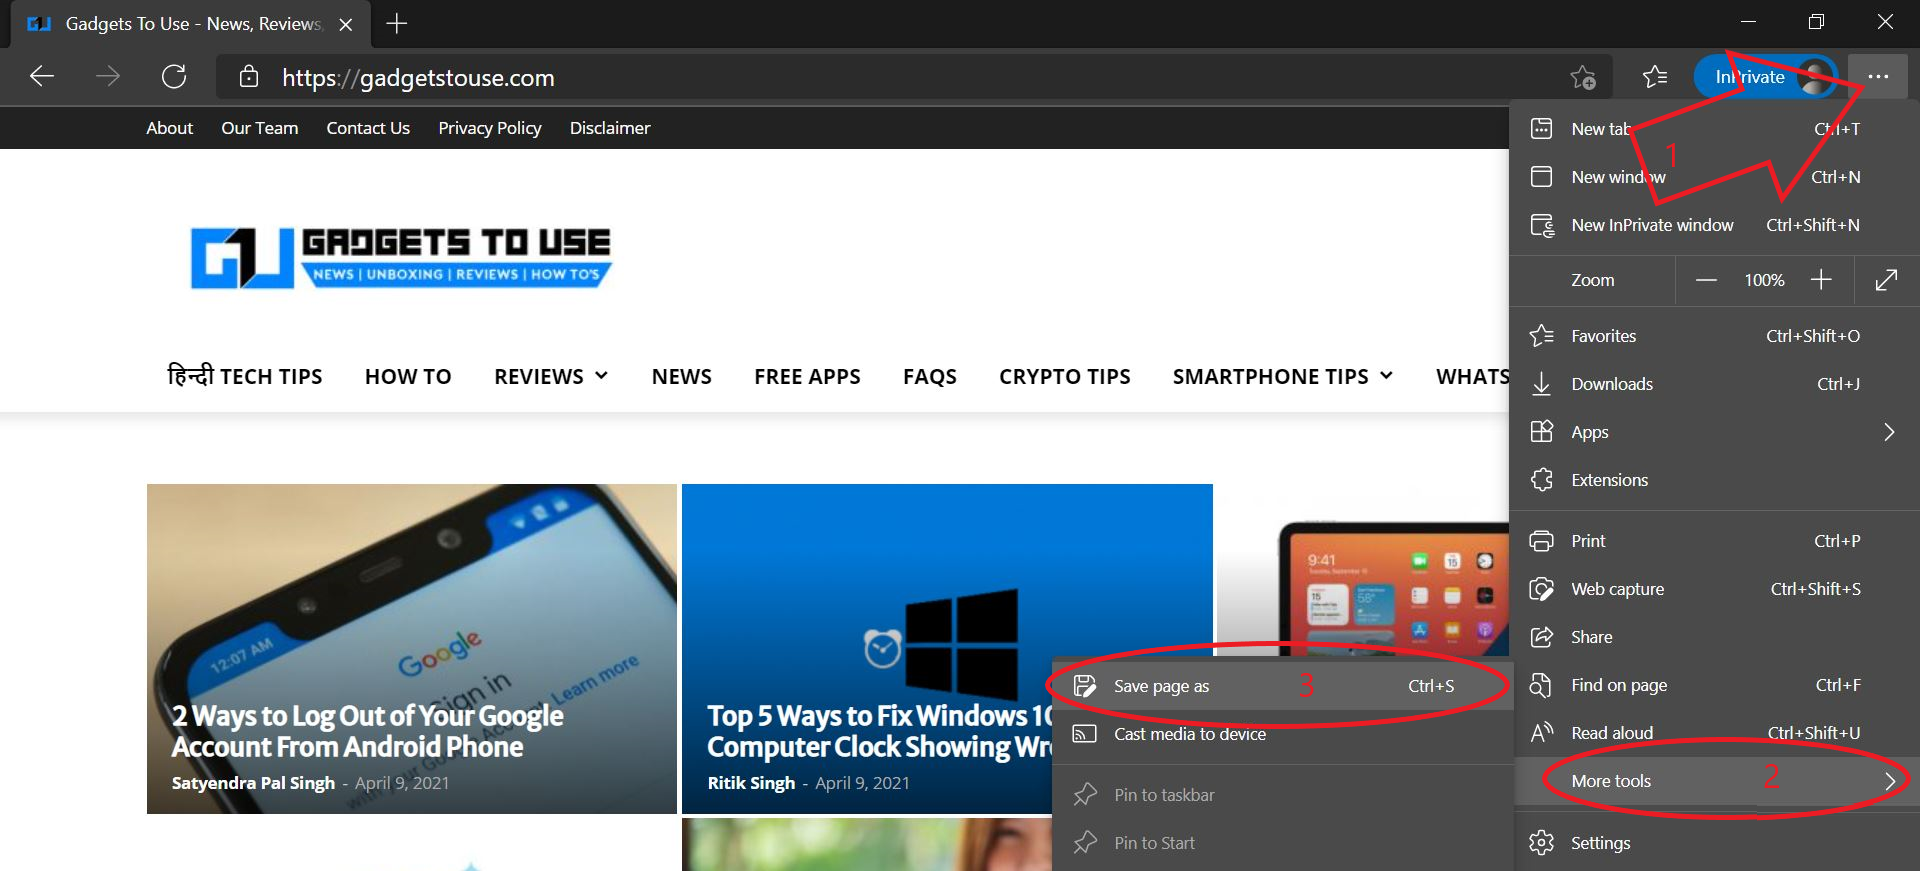 Download Complete Website Pages for Offline Viewing